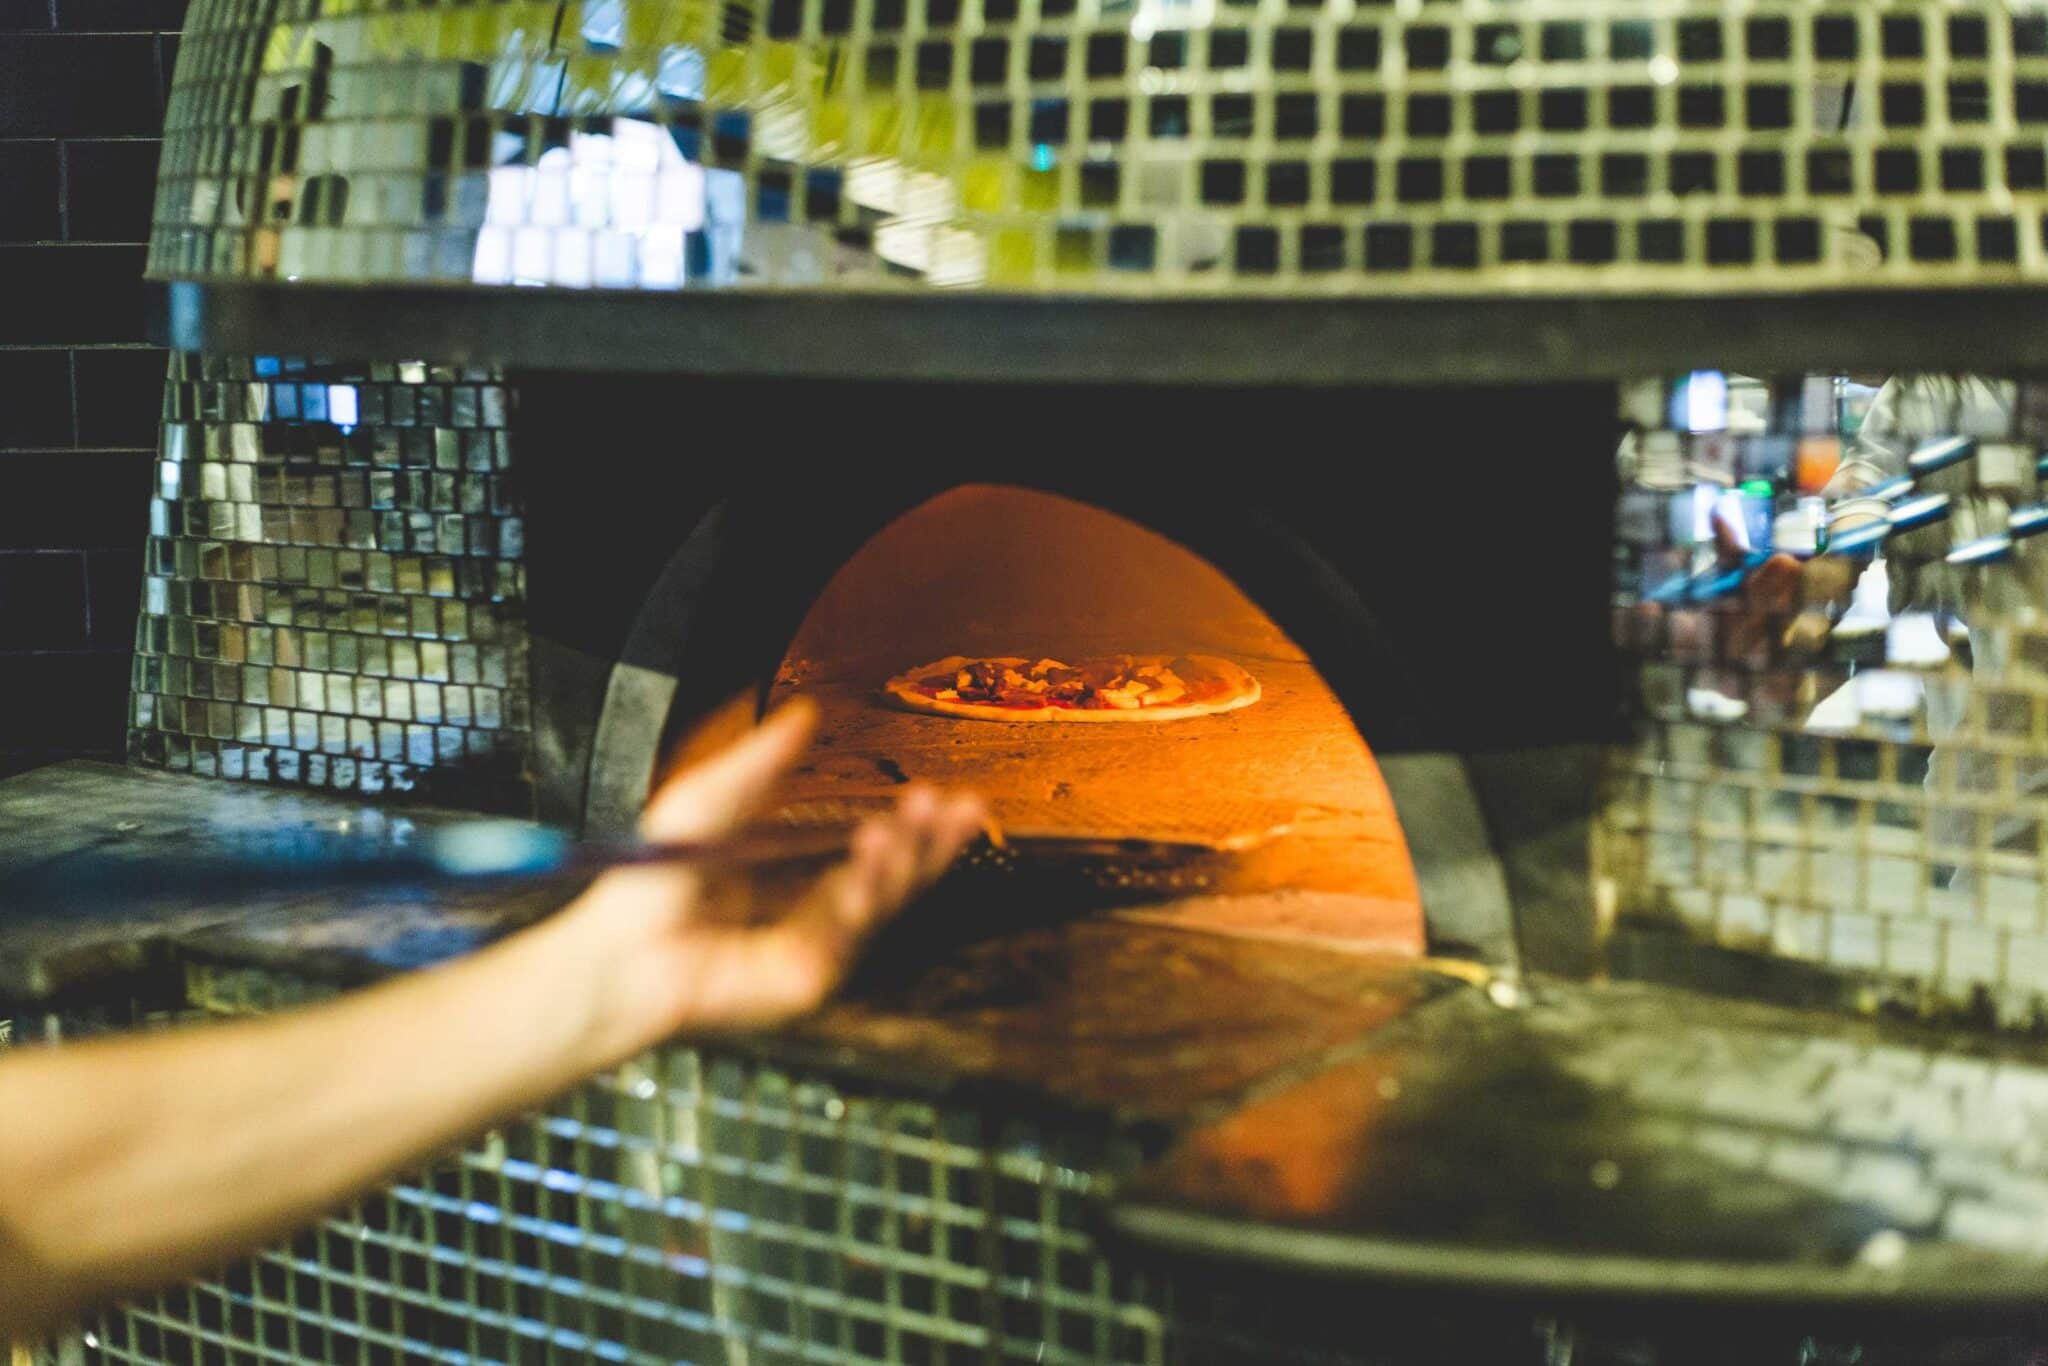 ply-oven-manchester-pizza-spots